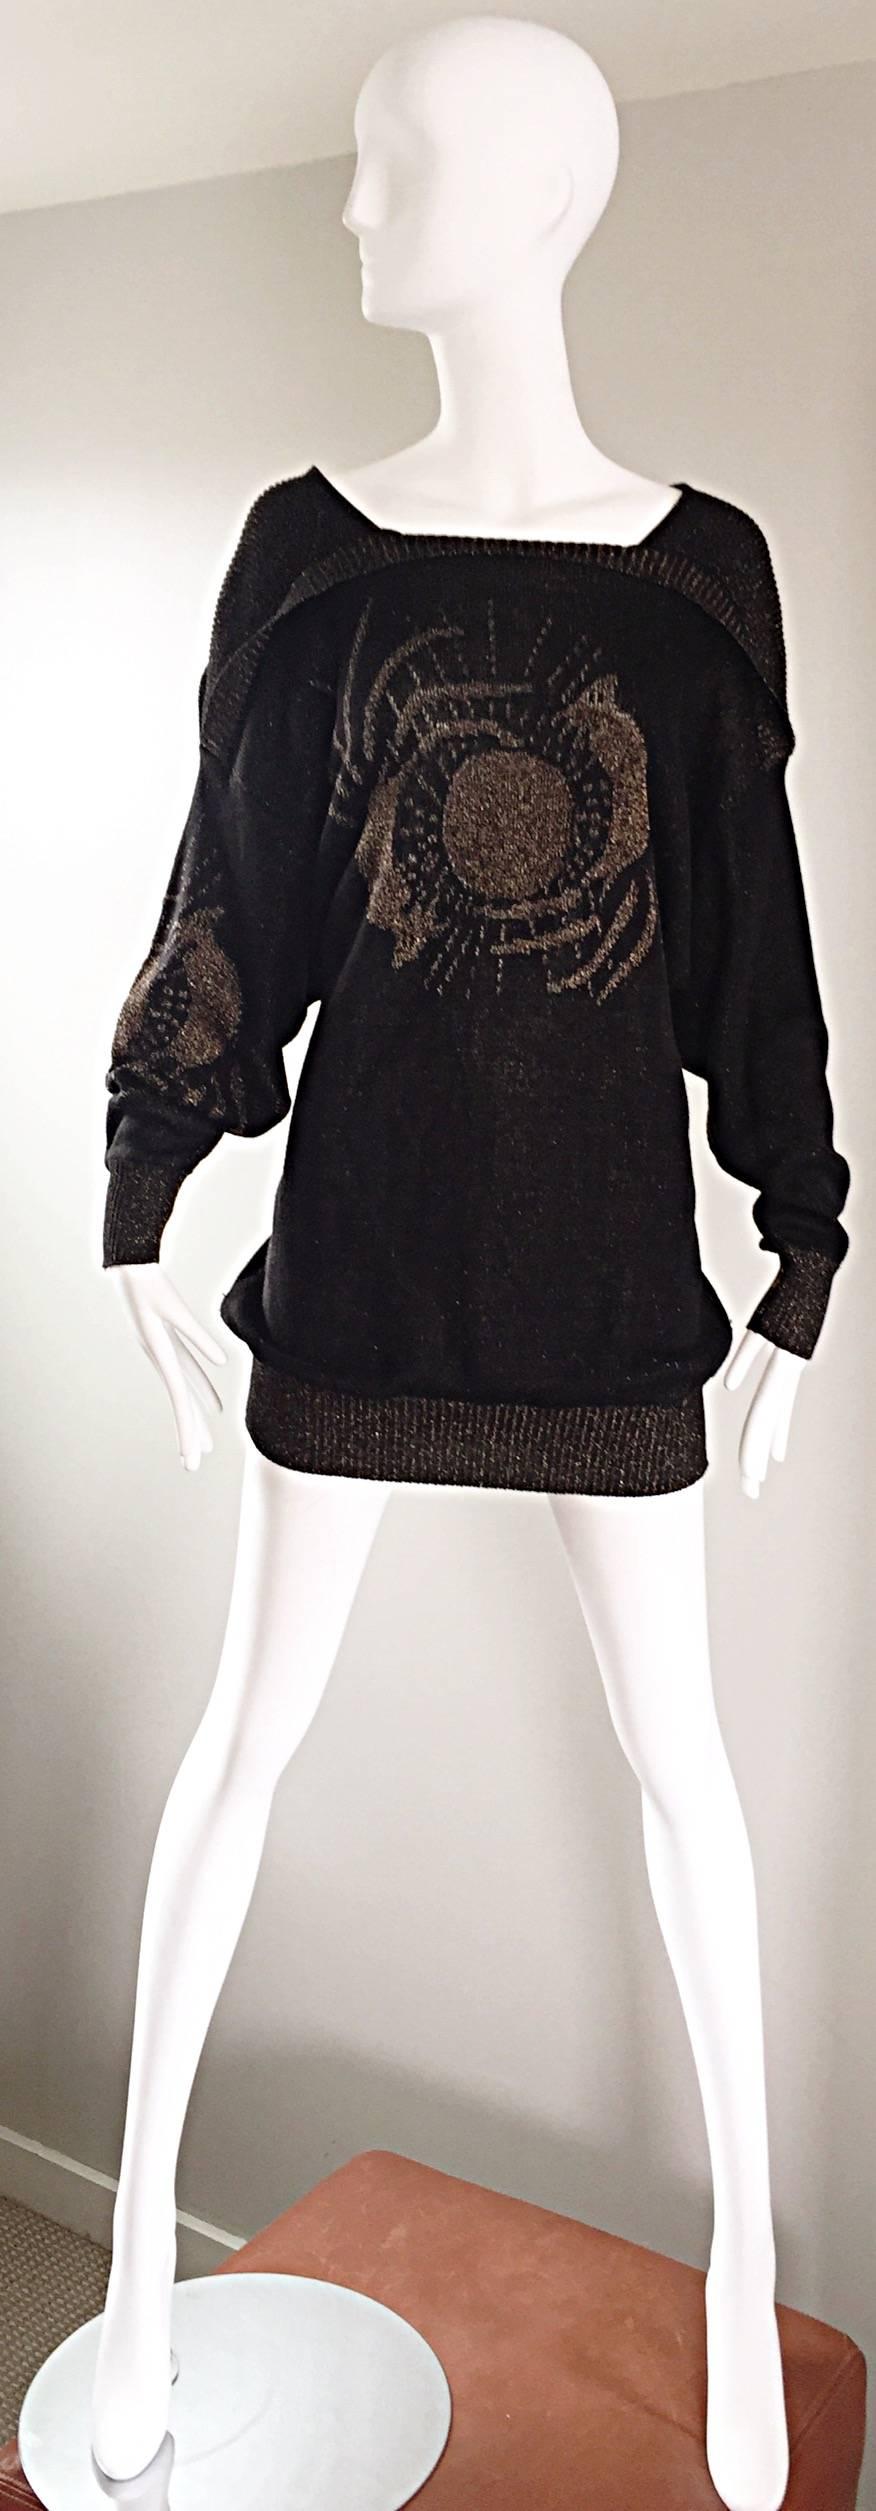 Wonderful vintage TED LAPIDUS HAUTE COUTURE black and gold metallic 'Circle of Life' mini sweater dress or tunic! So much hand-sewn detail went into the construction of this gem. Features a 'Circle of Life' intarsia print on the front and at